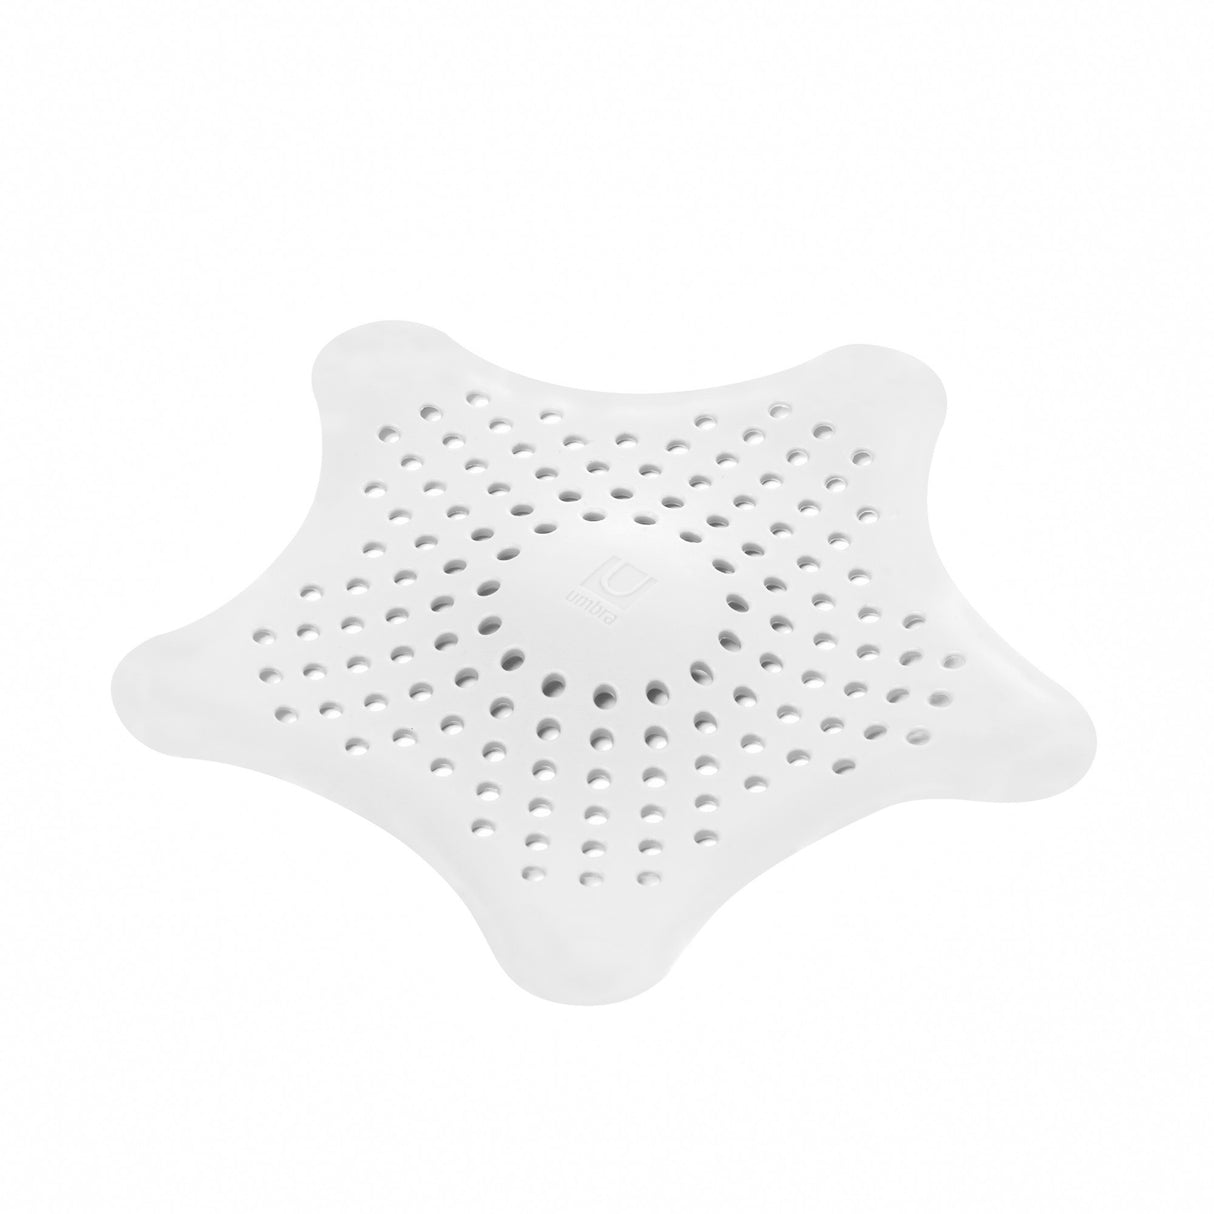 Drain Stop & Hair Catcher | color: White | Hover